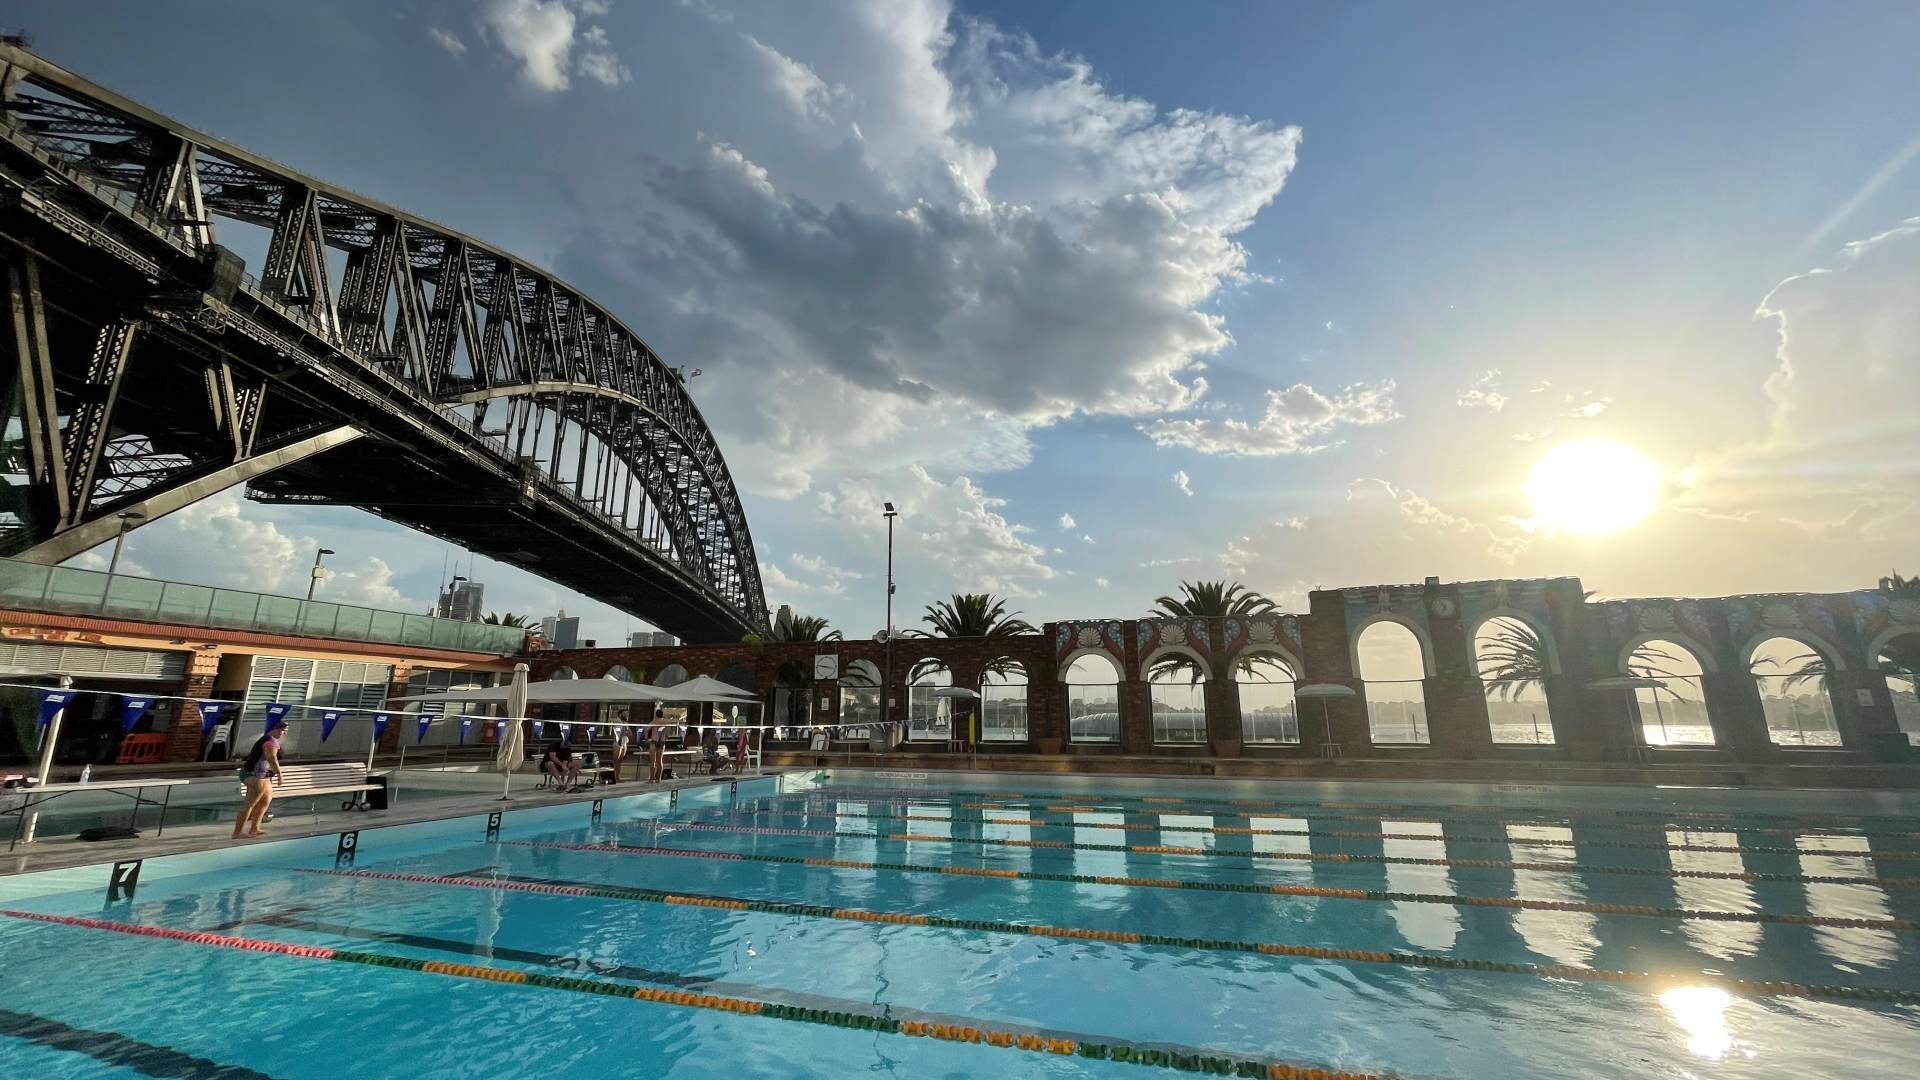 North Sydney Pool Is Closing Next Month for a $64 Million Renovation That Will Include a Gelato Bar